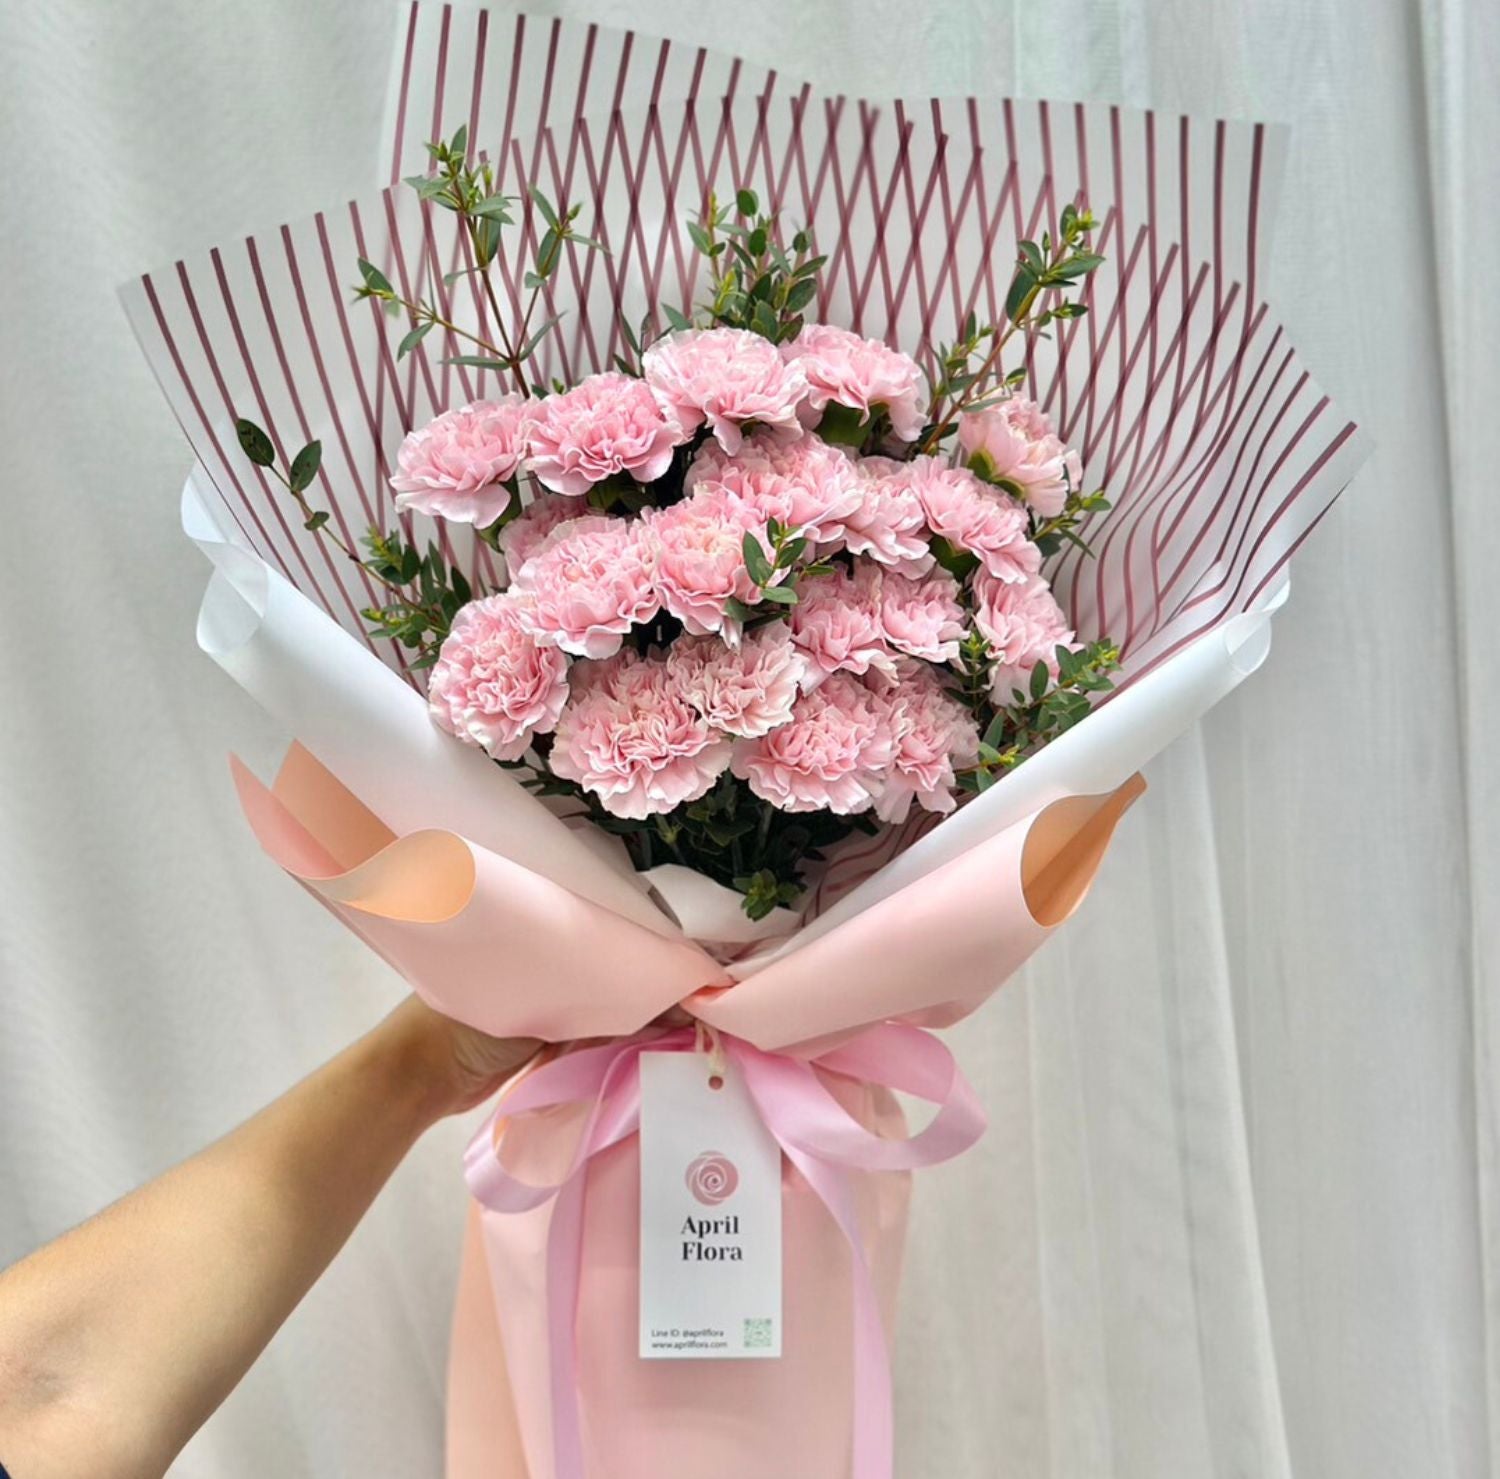 All Pink Fluffy Bouquet Of Carnations - Phuket